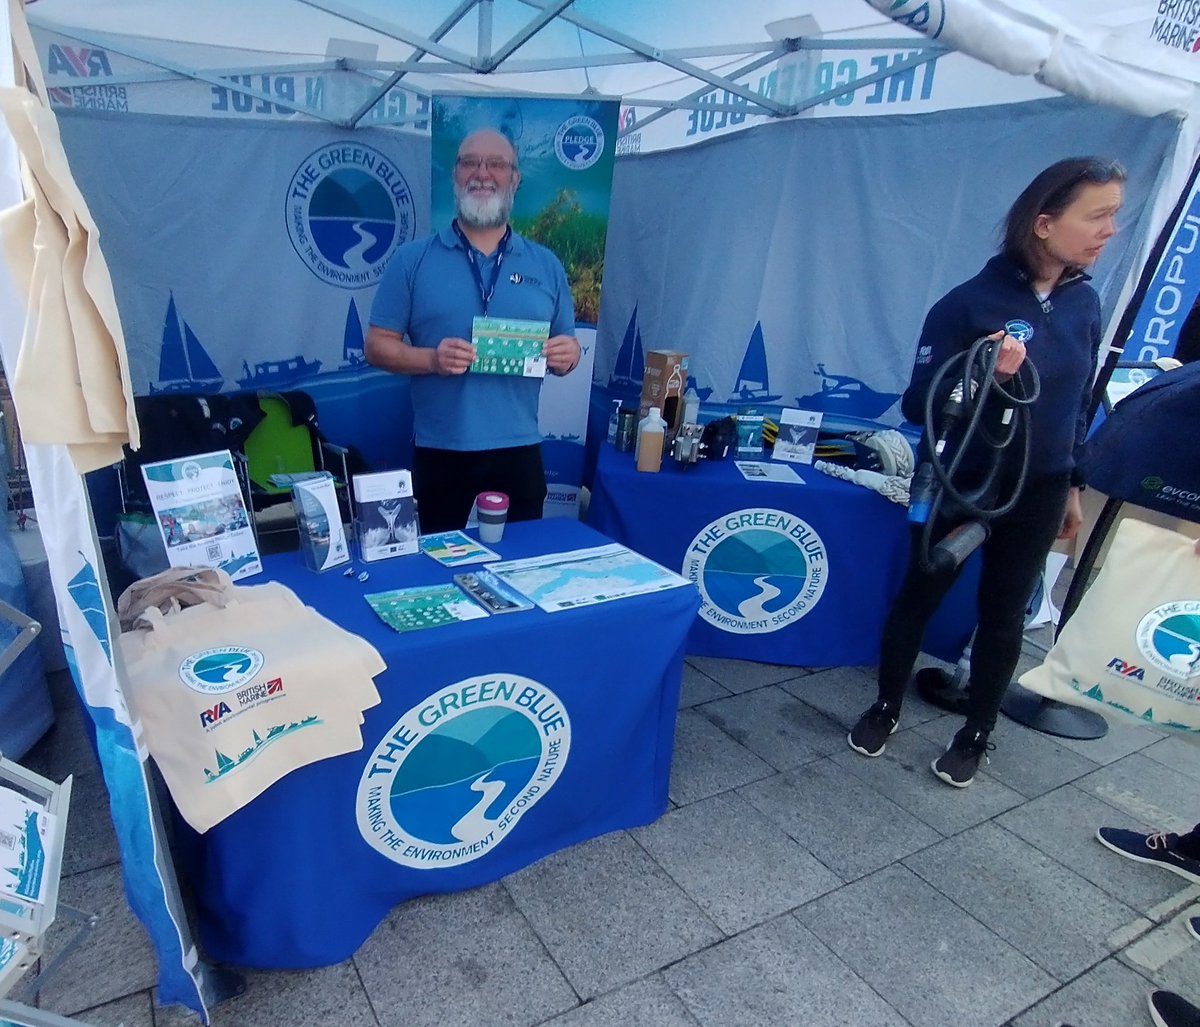 Having fun helping spread the @EULIFERemedies message today on the @TheGreenBlue stand at the #SouthCoastandGreenTechBoatShow and happy that the boaters we've spoken to all want to look after #seagrass and #saveourseabed @HIWWTMarine